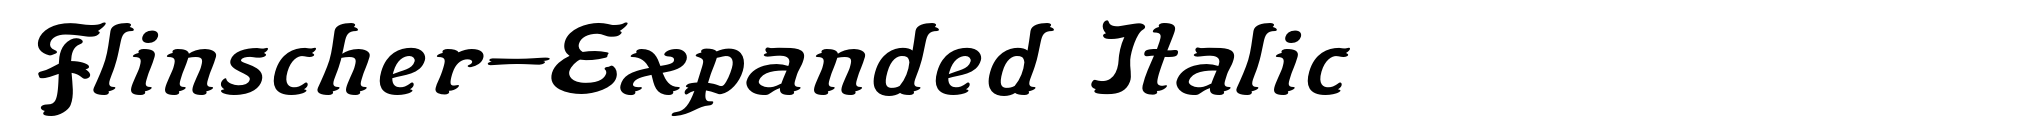 Flinscher-Expanded Italic image